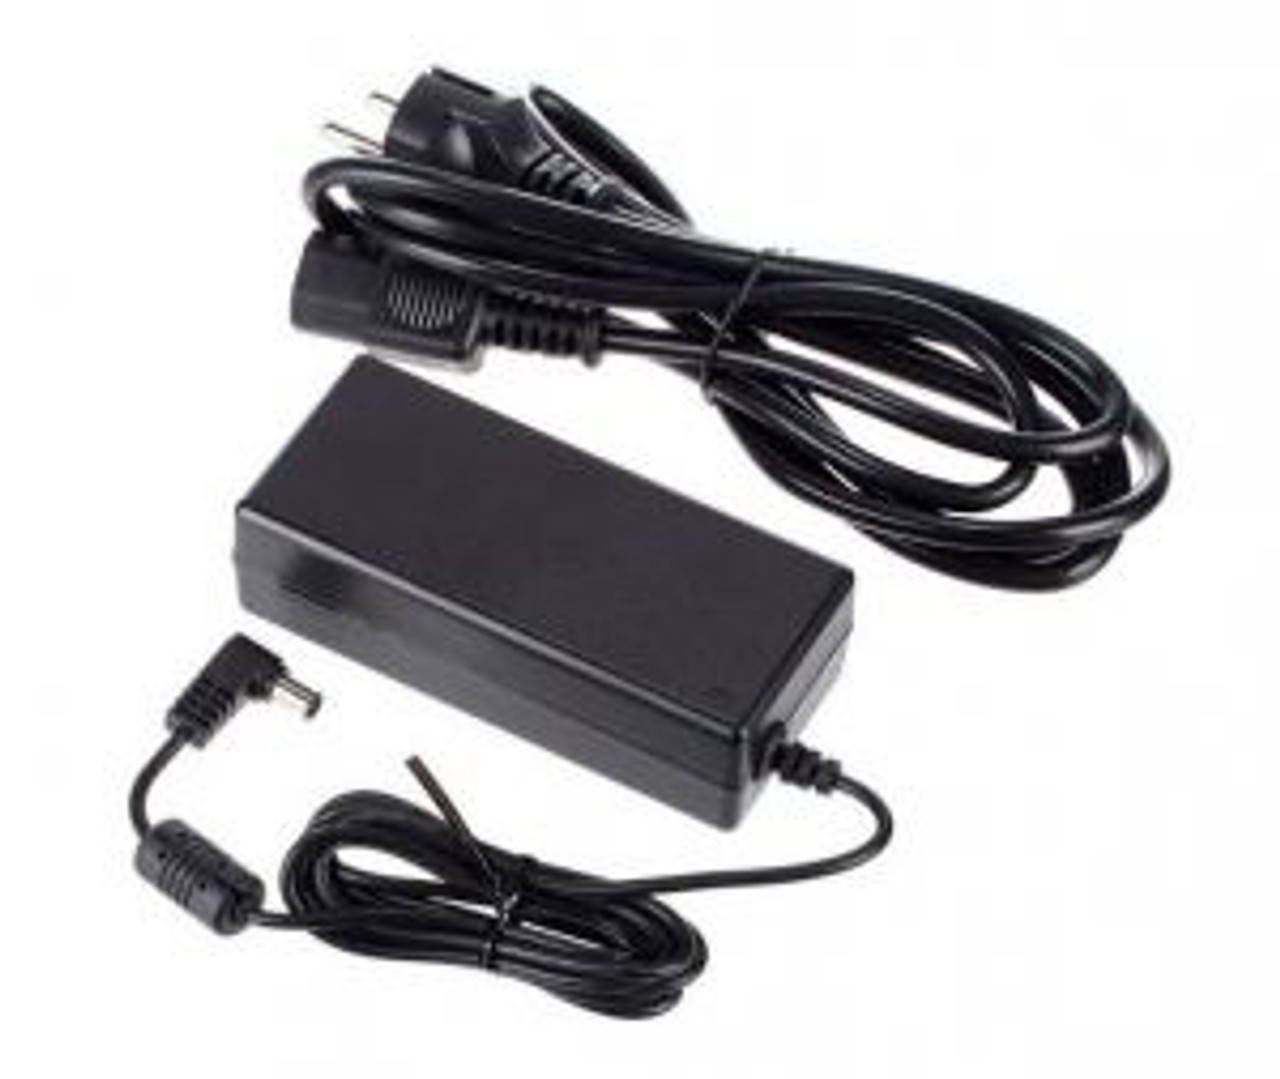 01-SSC-9205 SonicWALL AC Adapter 36 W 12 V DC For Security Device 110 V AC 220 V AC3 A